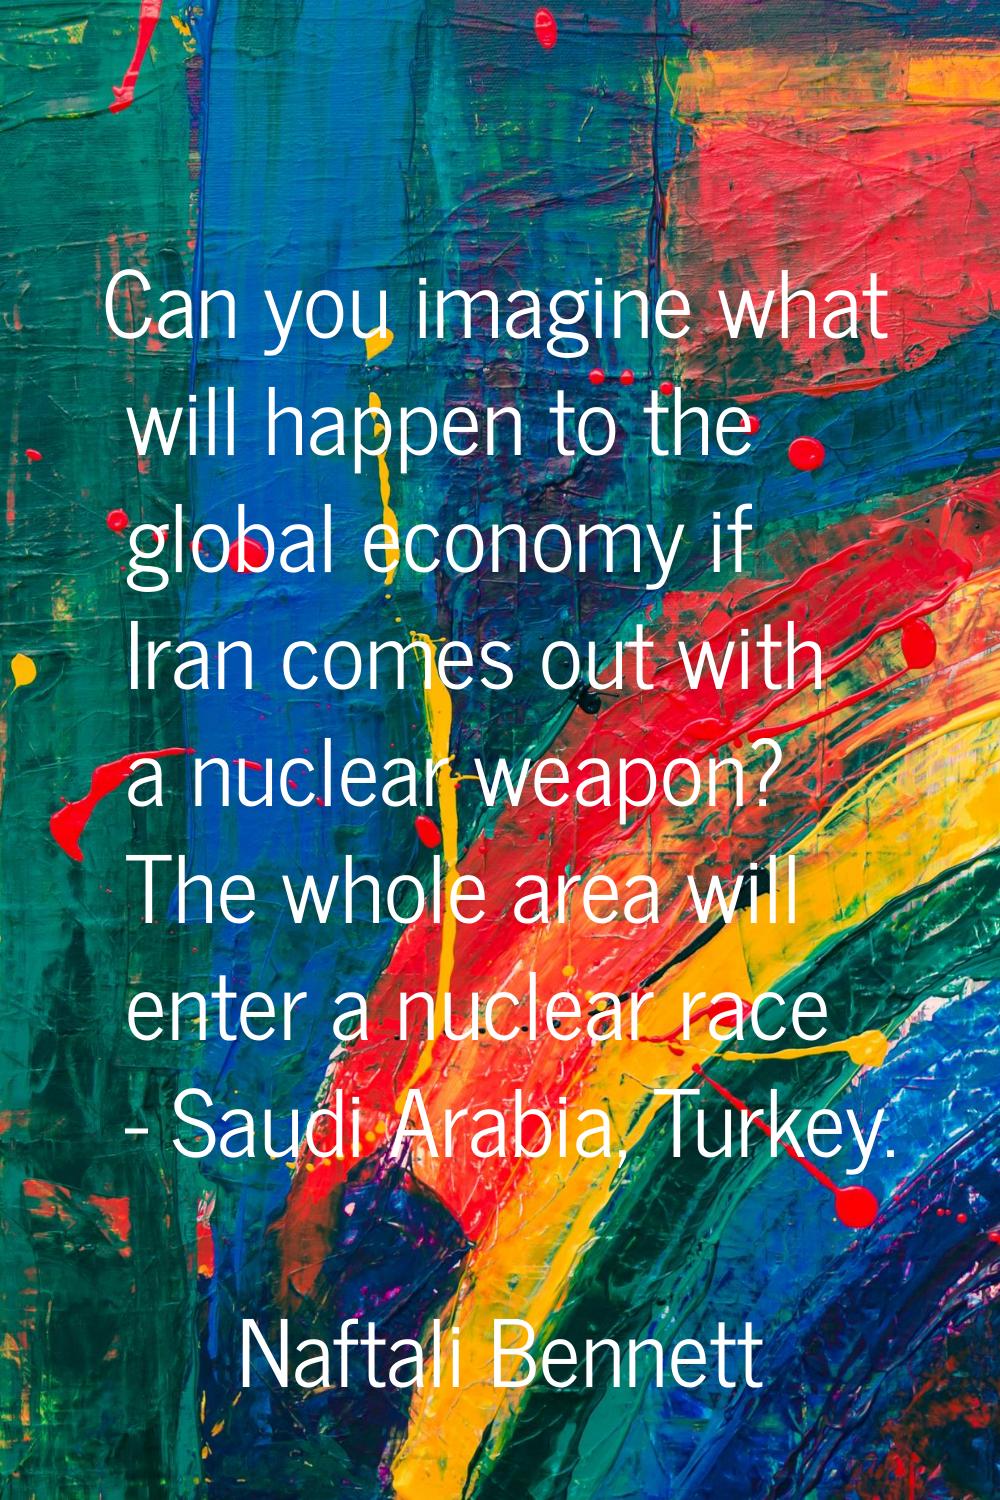 Can you imagine what will happen to the global economy if Iran comes out with a nuclear weapon? The